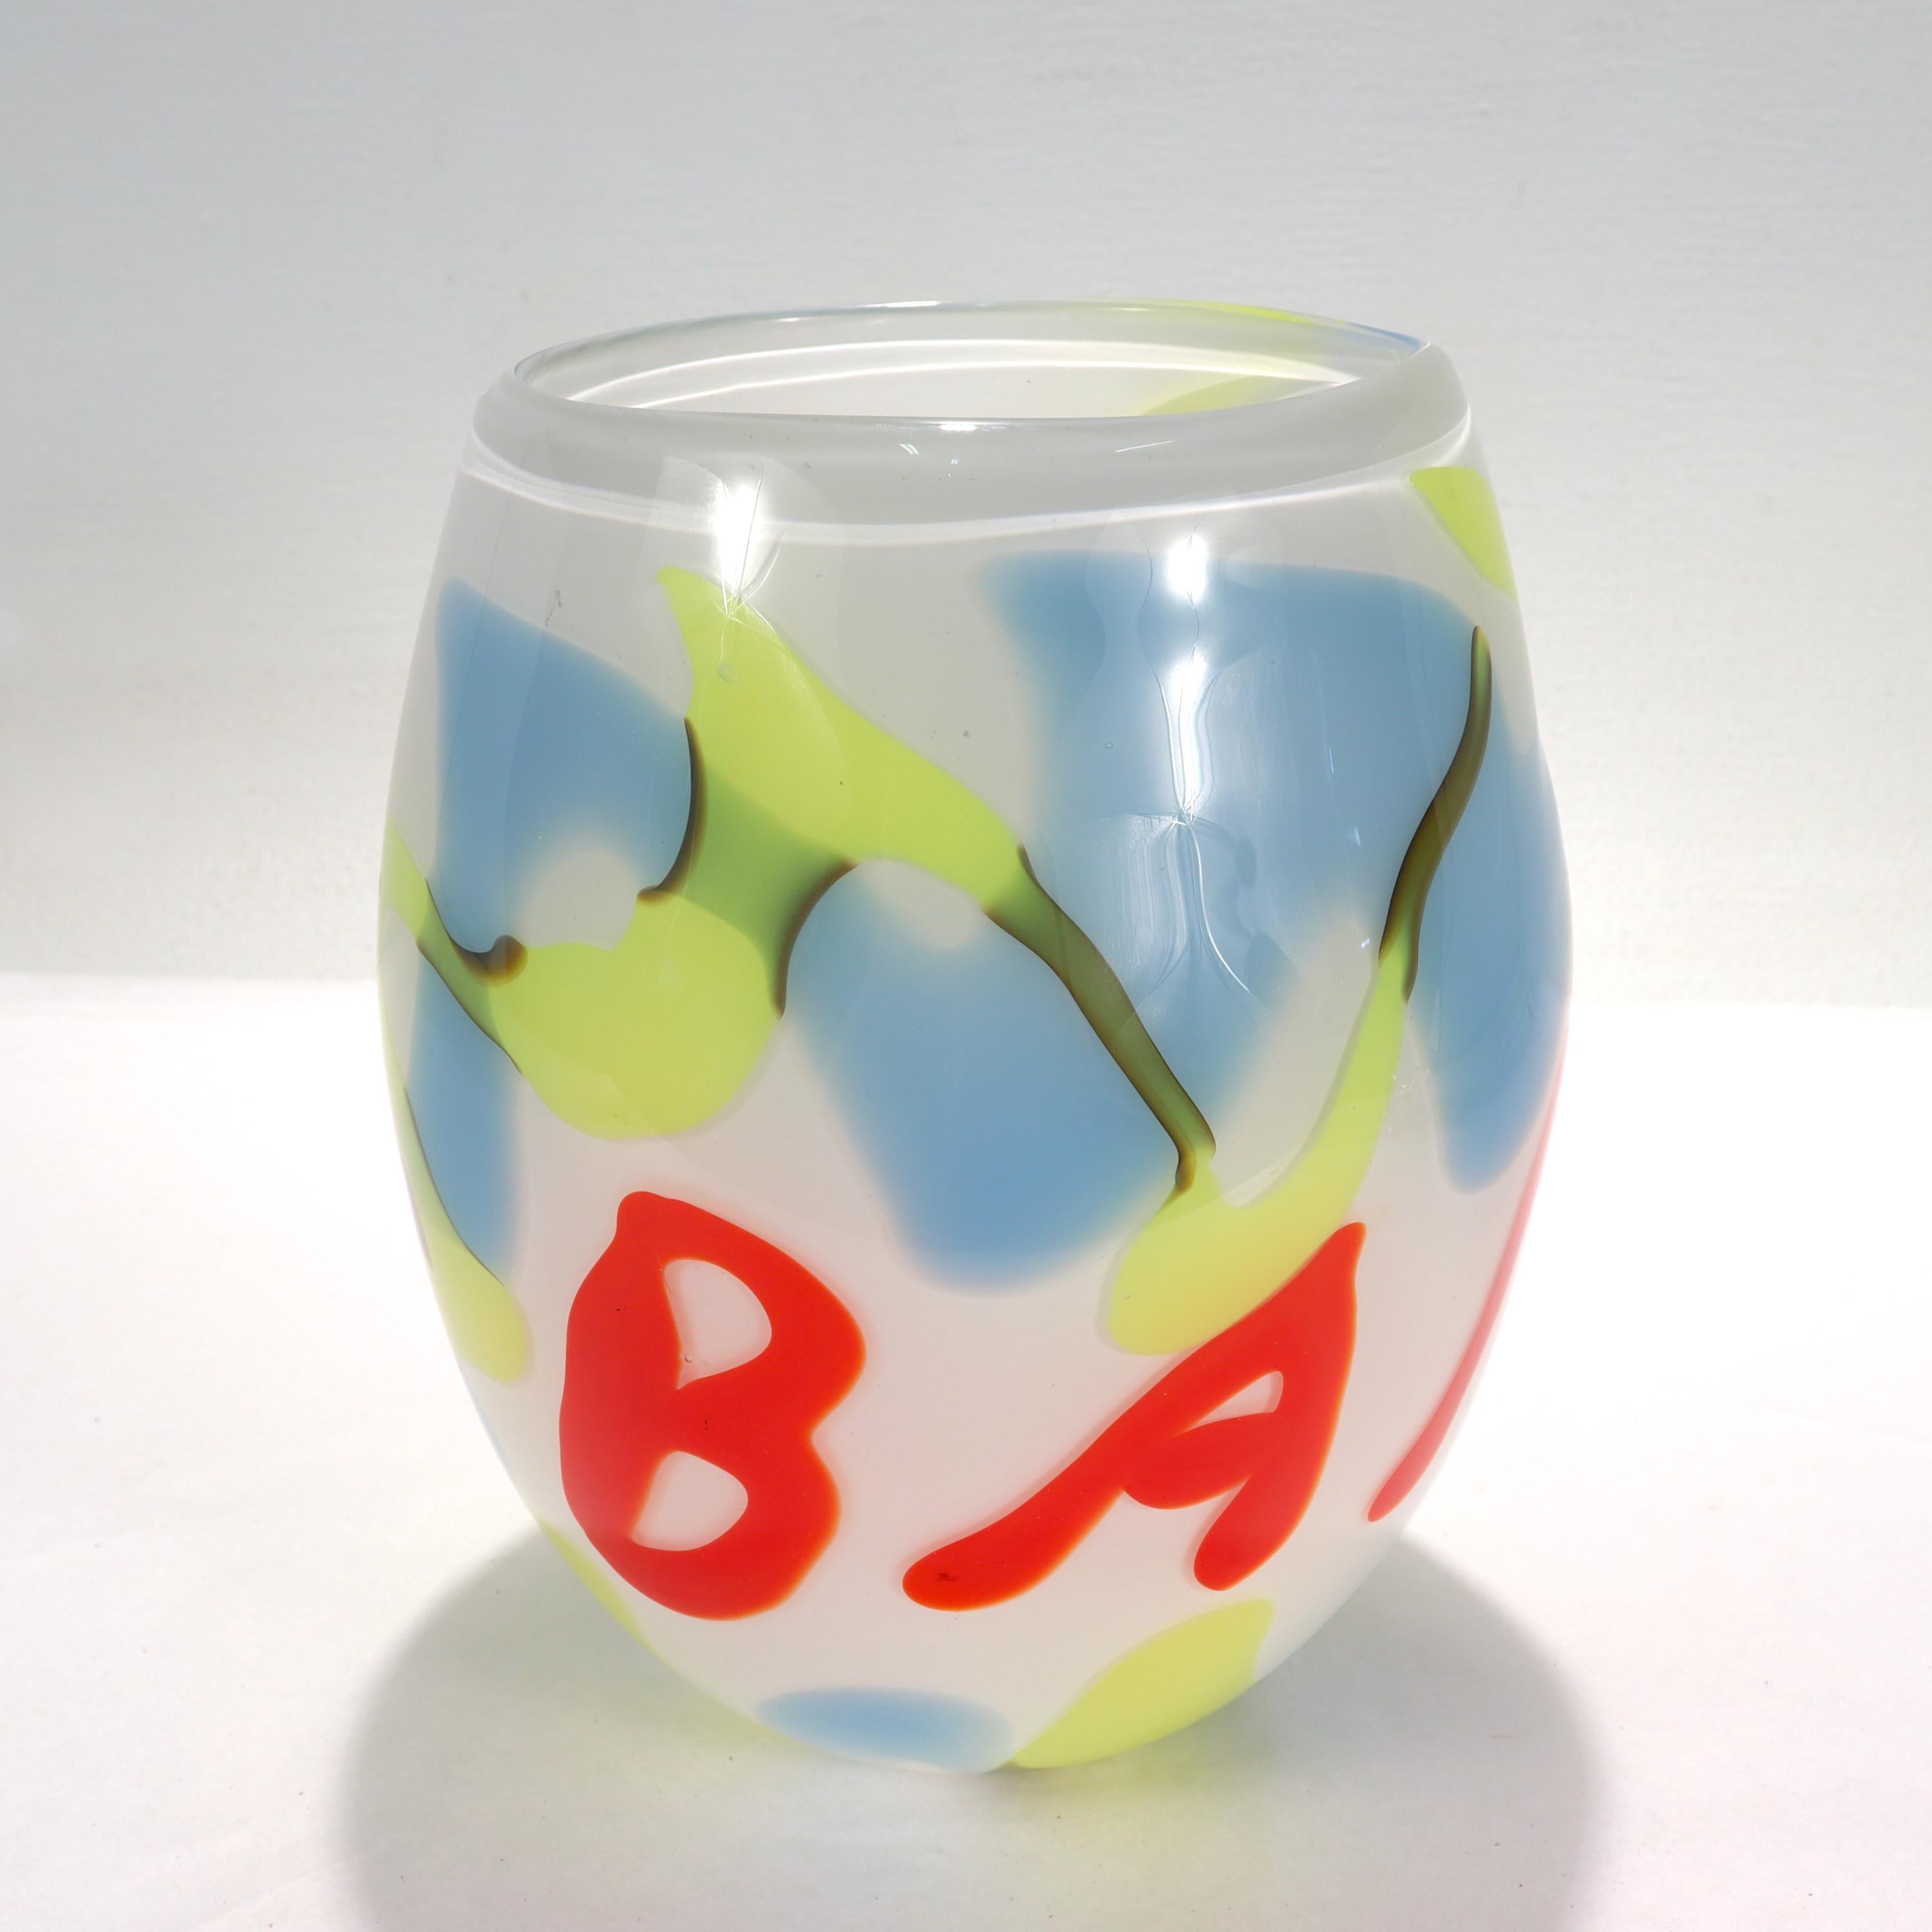 A fine Pop-Art art glass vase. 

Decorated with a red 